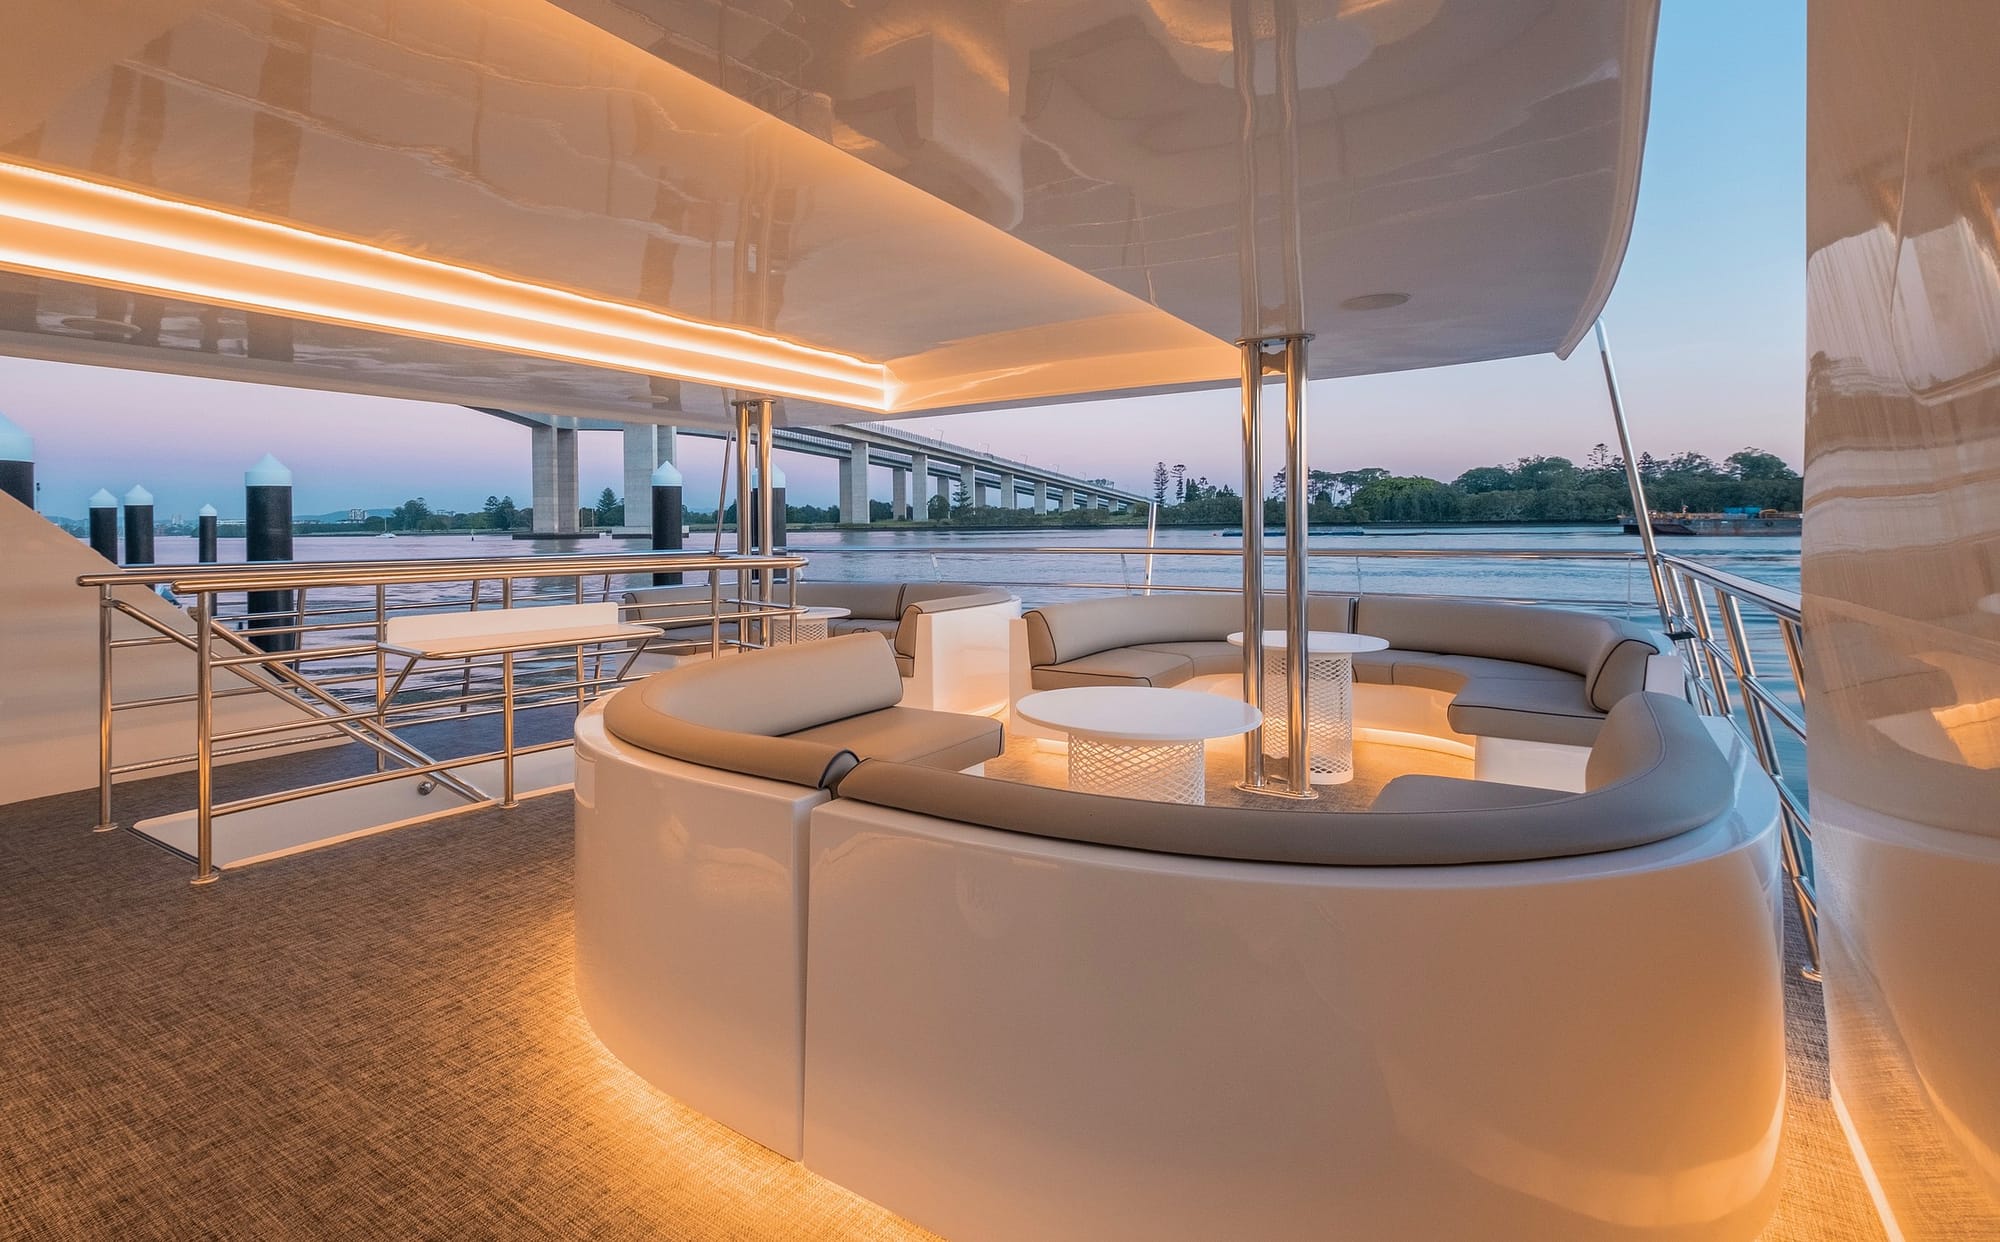 luxury boat interior with lighting under the seats with view of the river